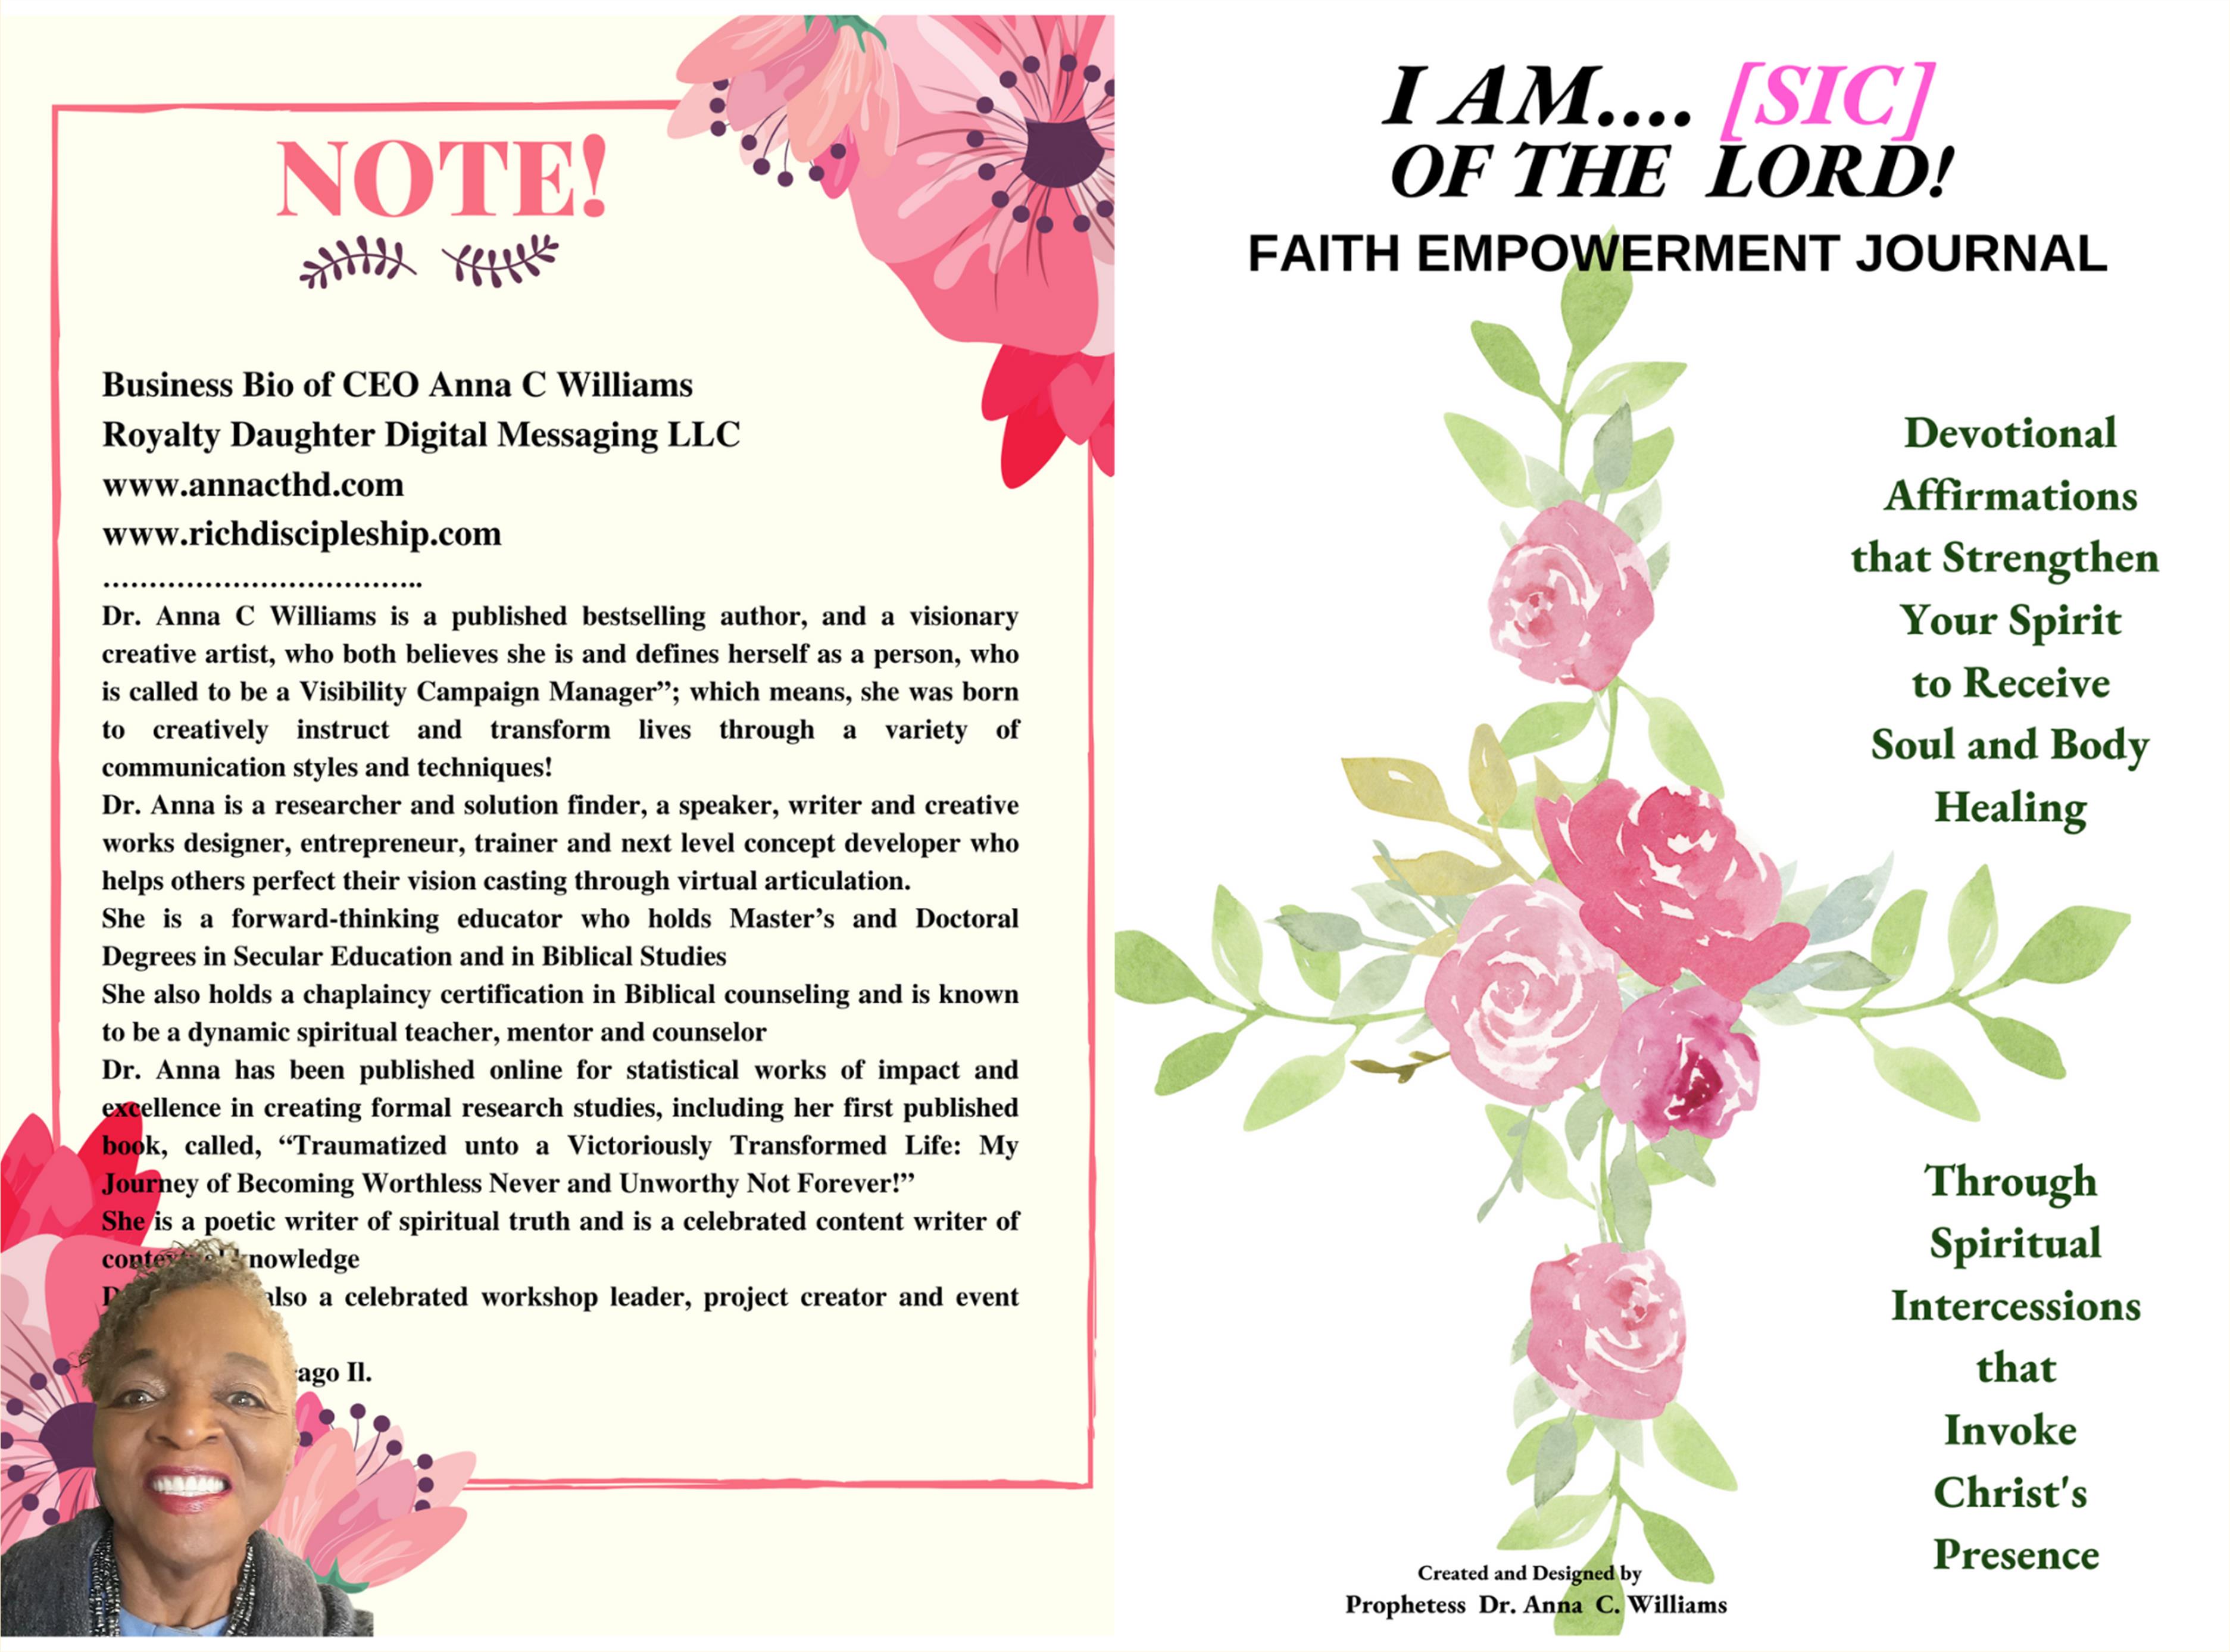 Faith Empowerment Journal: I Am [SIC} of the Lord cover image